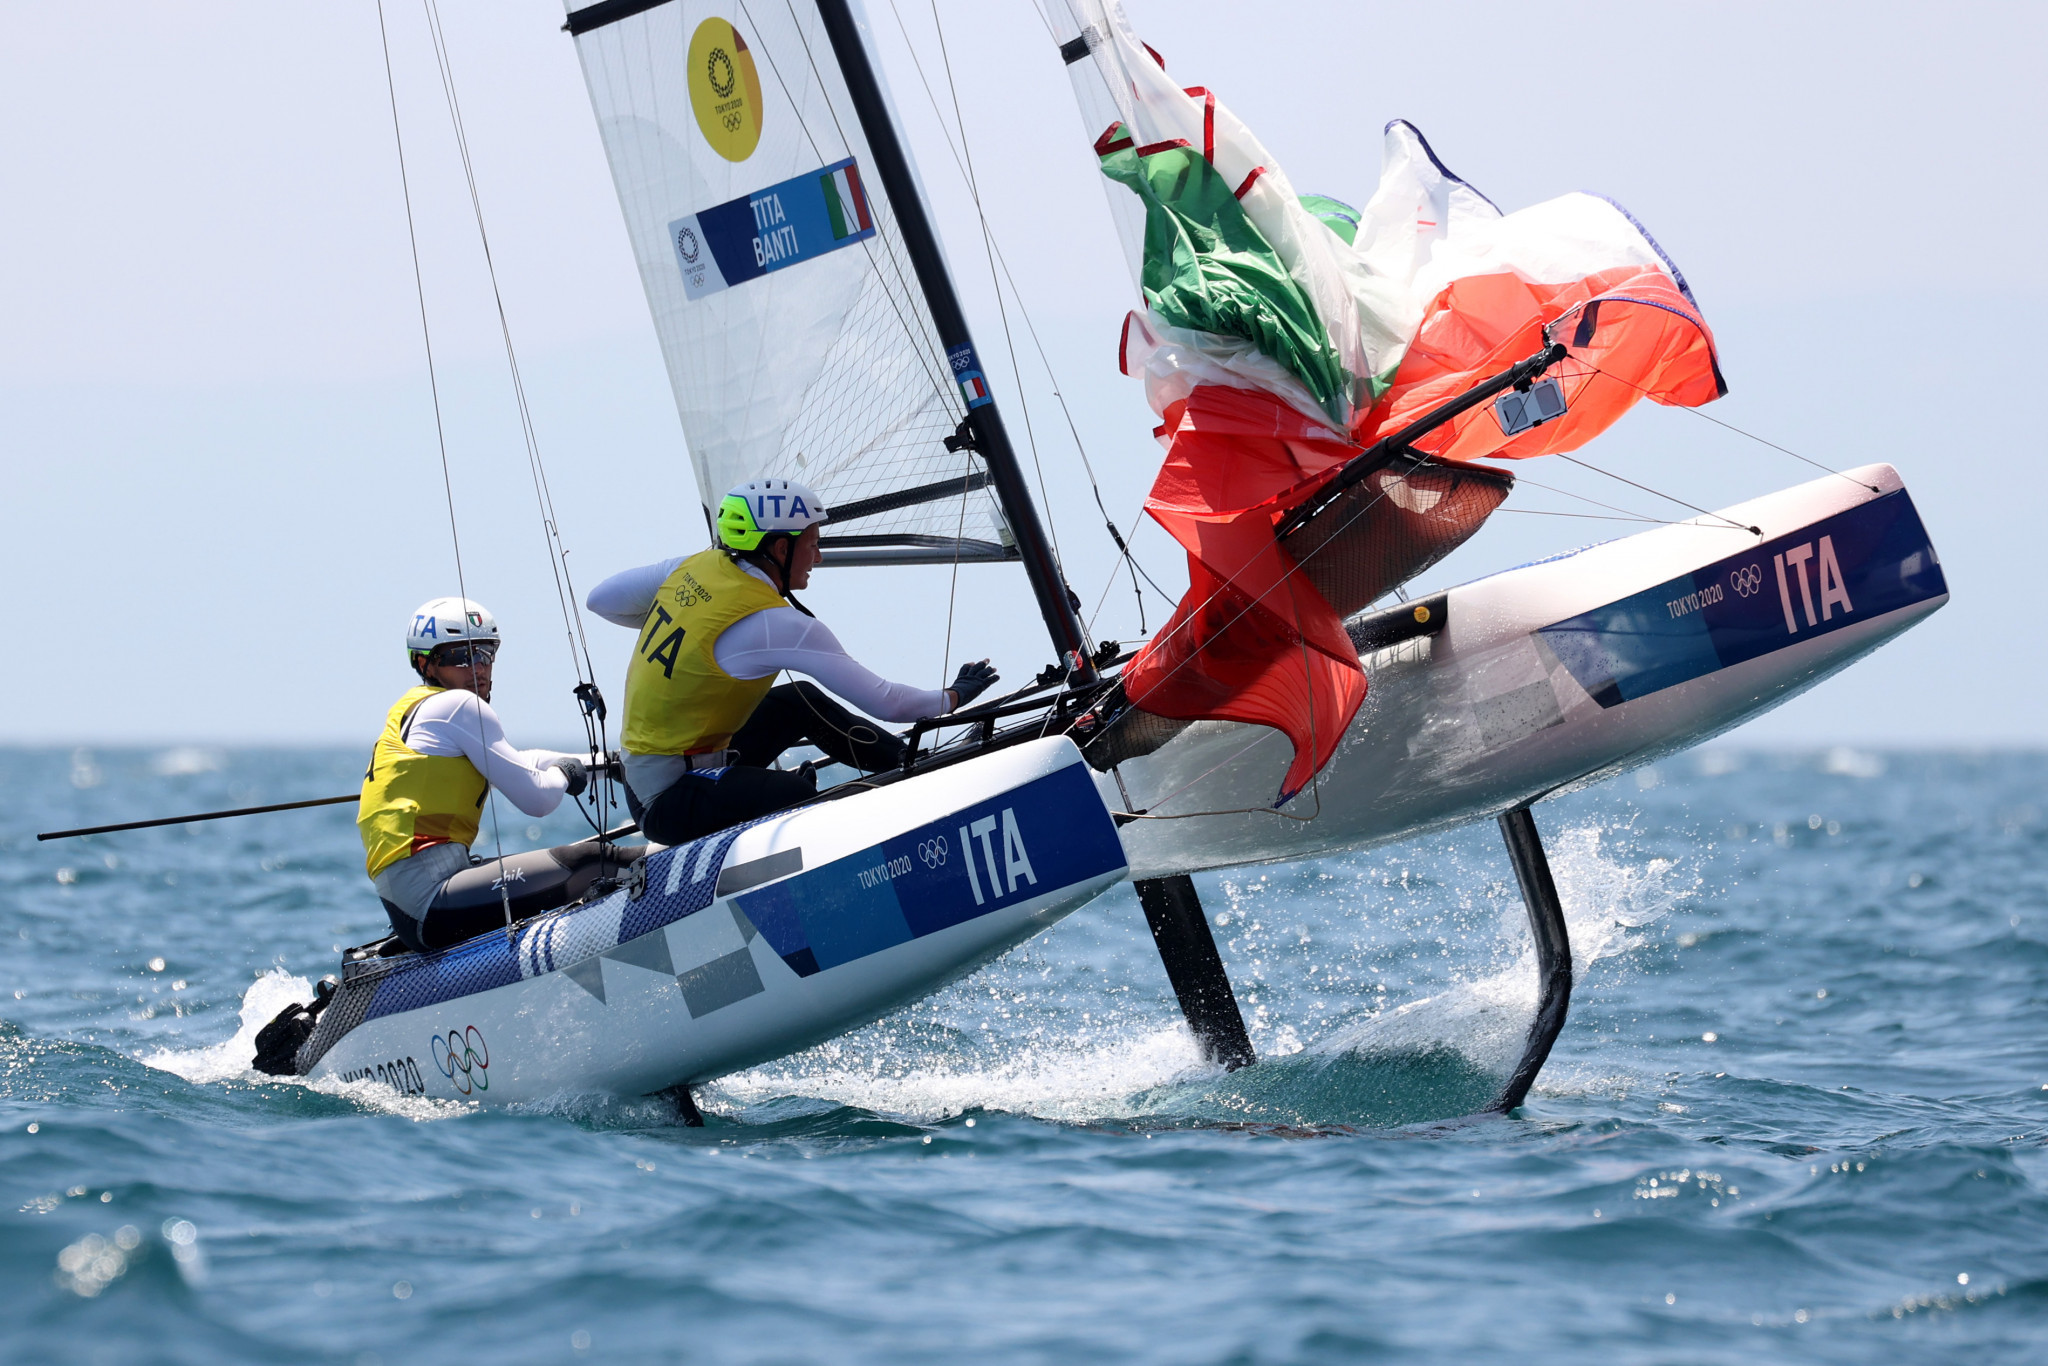 Olympic champions Tita and Banti remain on fire at 49er, 49erFX and Nacra 17 World Championships